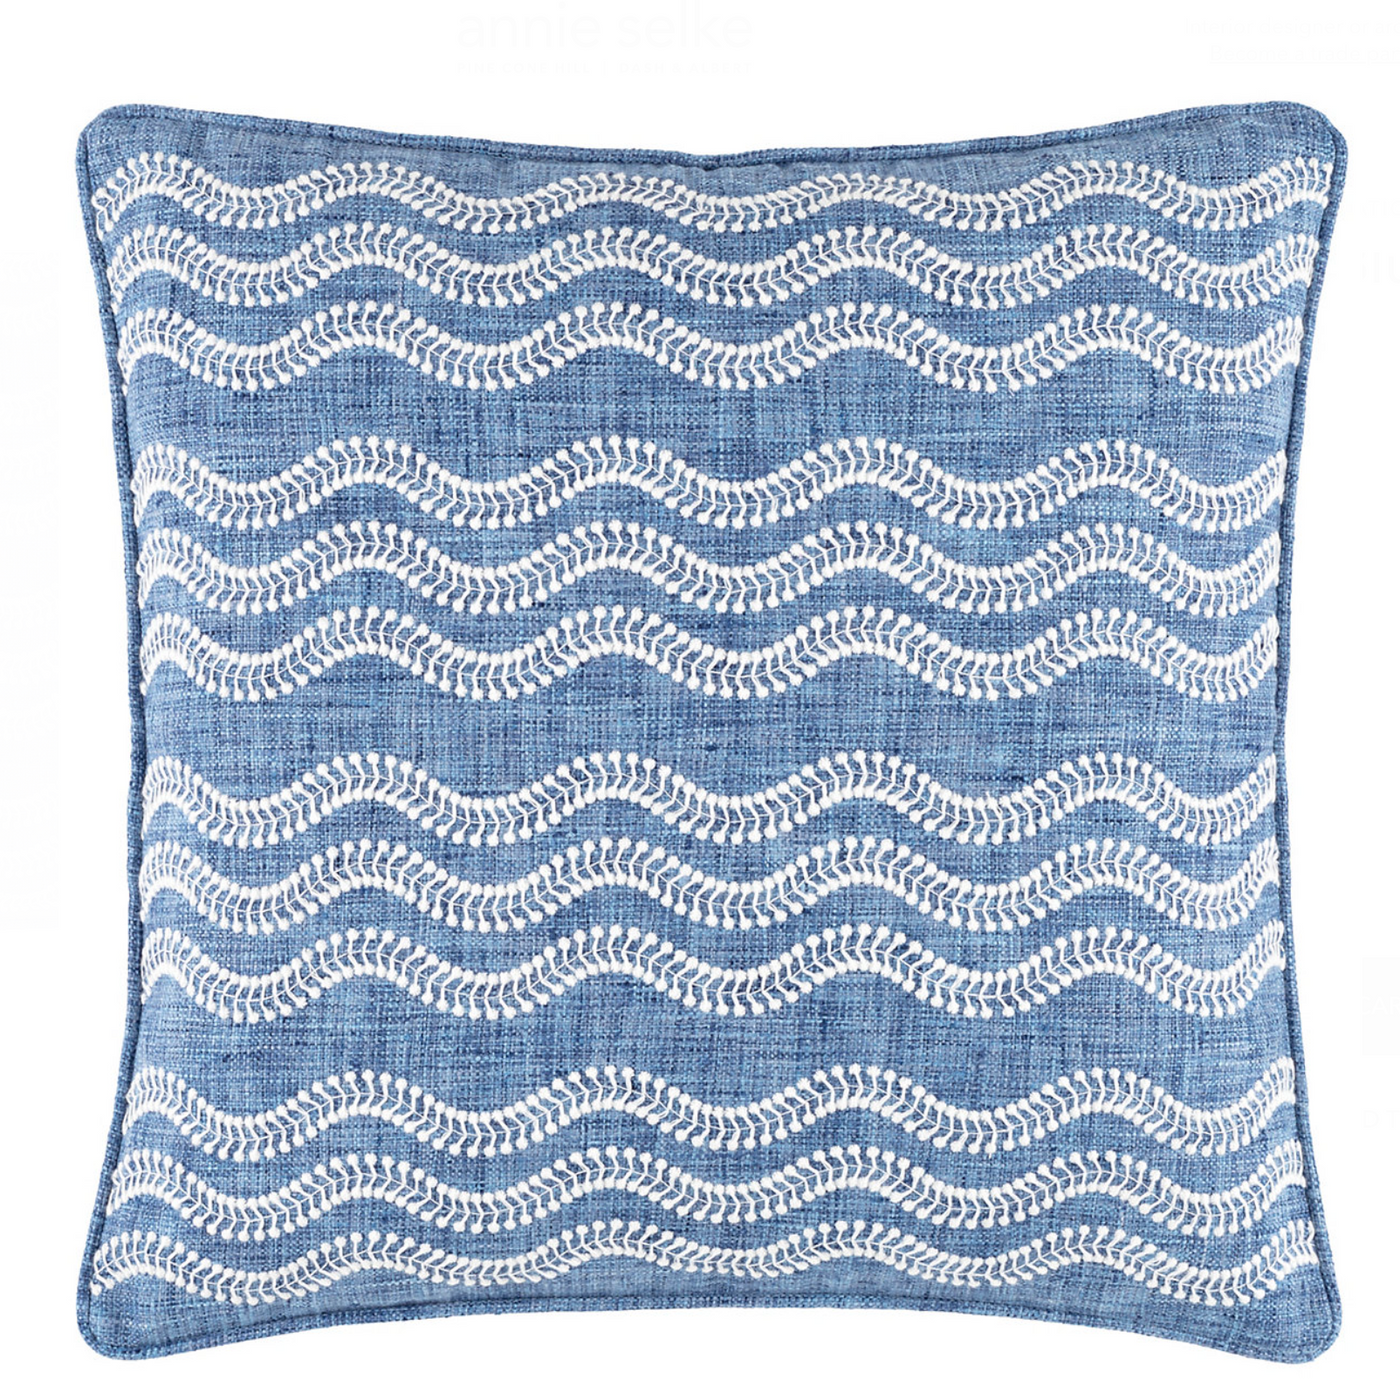 PILLOW DECORATIVE INDOOR/OUTDOOR WAVY STRIPES (Available in 3 Colors)